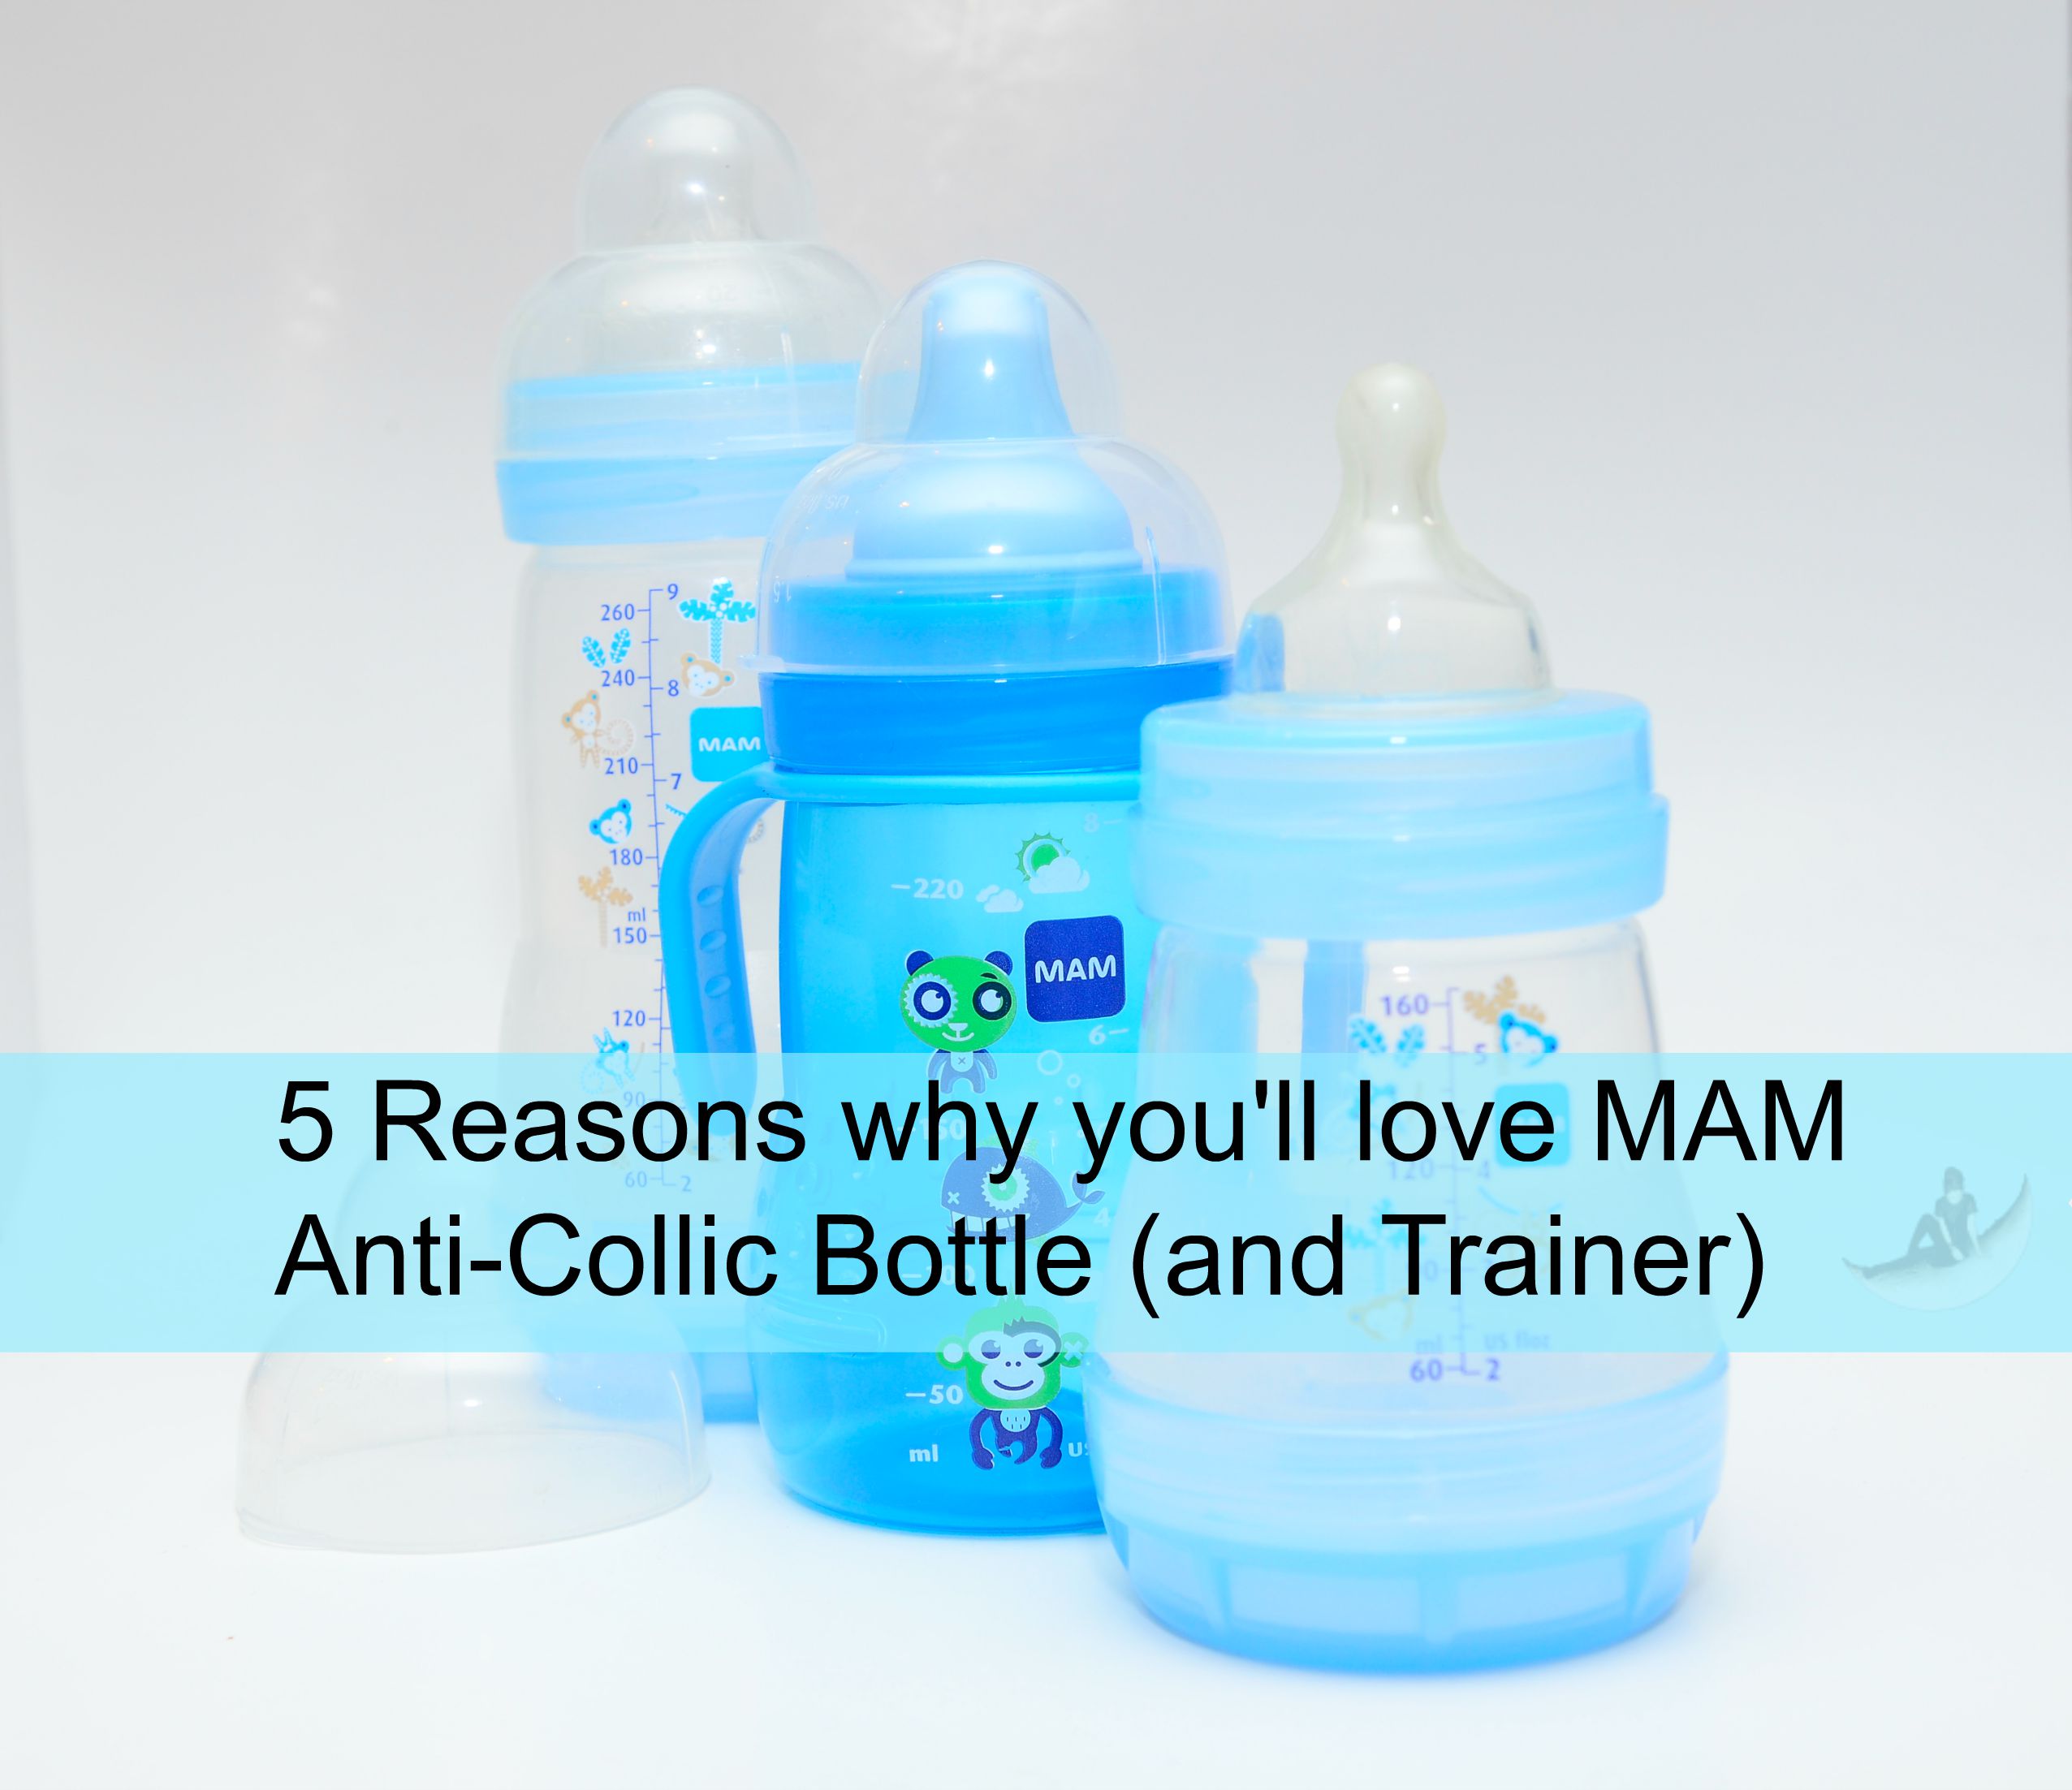 5 Reasons why you’ll love MAM Anti-Collic Bottle (and Trainer)